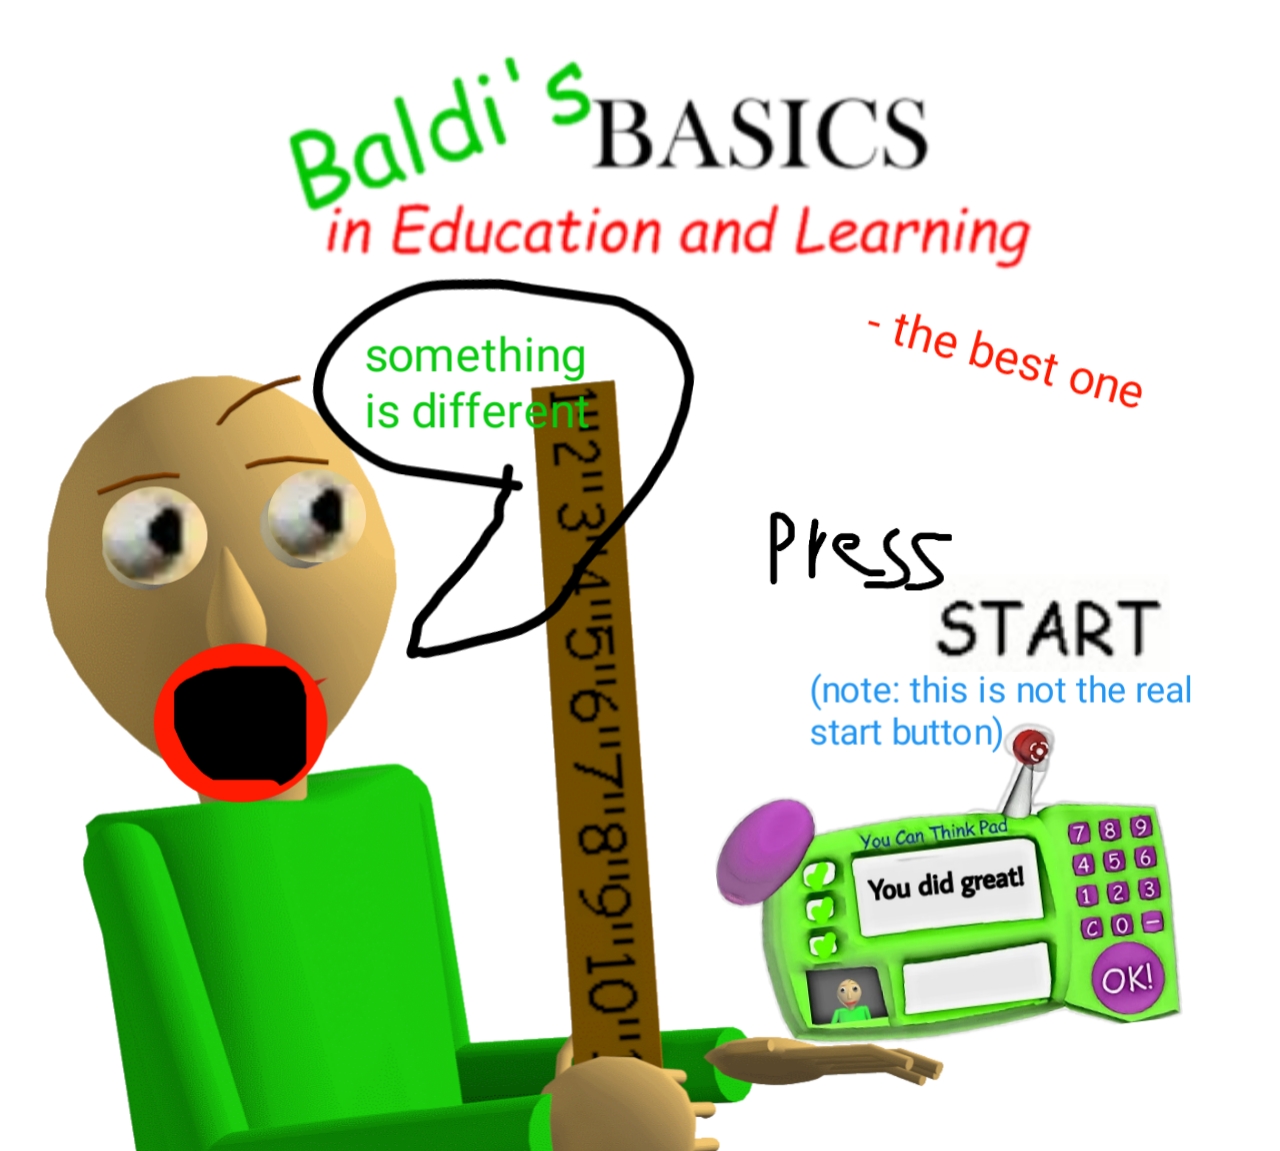 Baldis Basics In Education And Learning The Best One By Baldi Side 7102